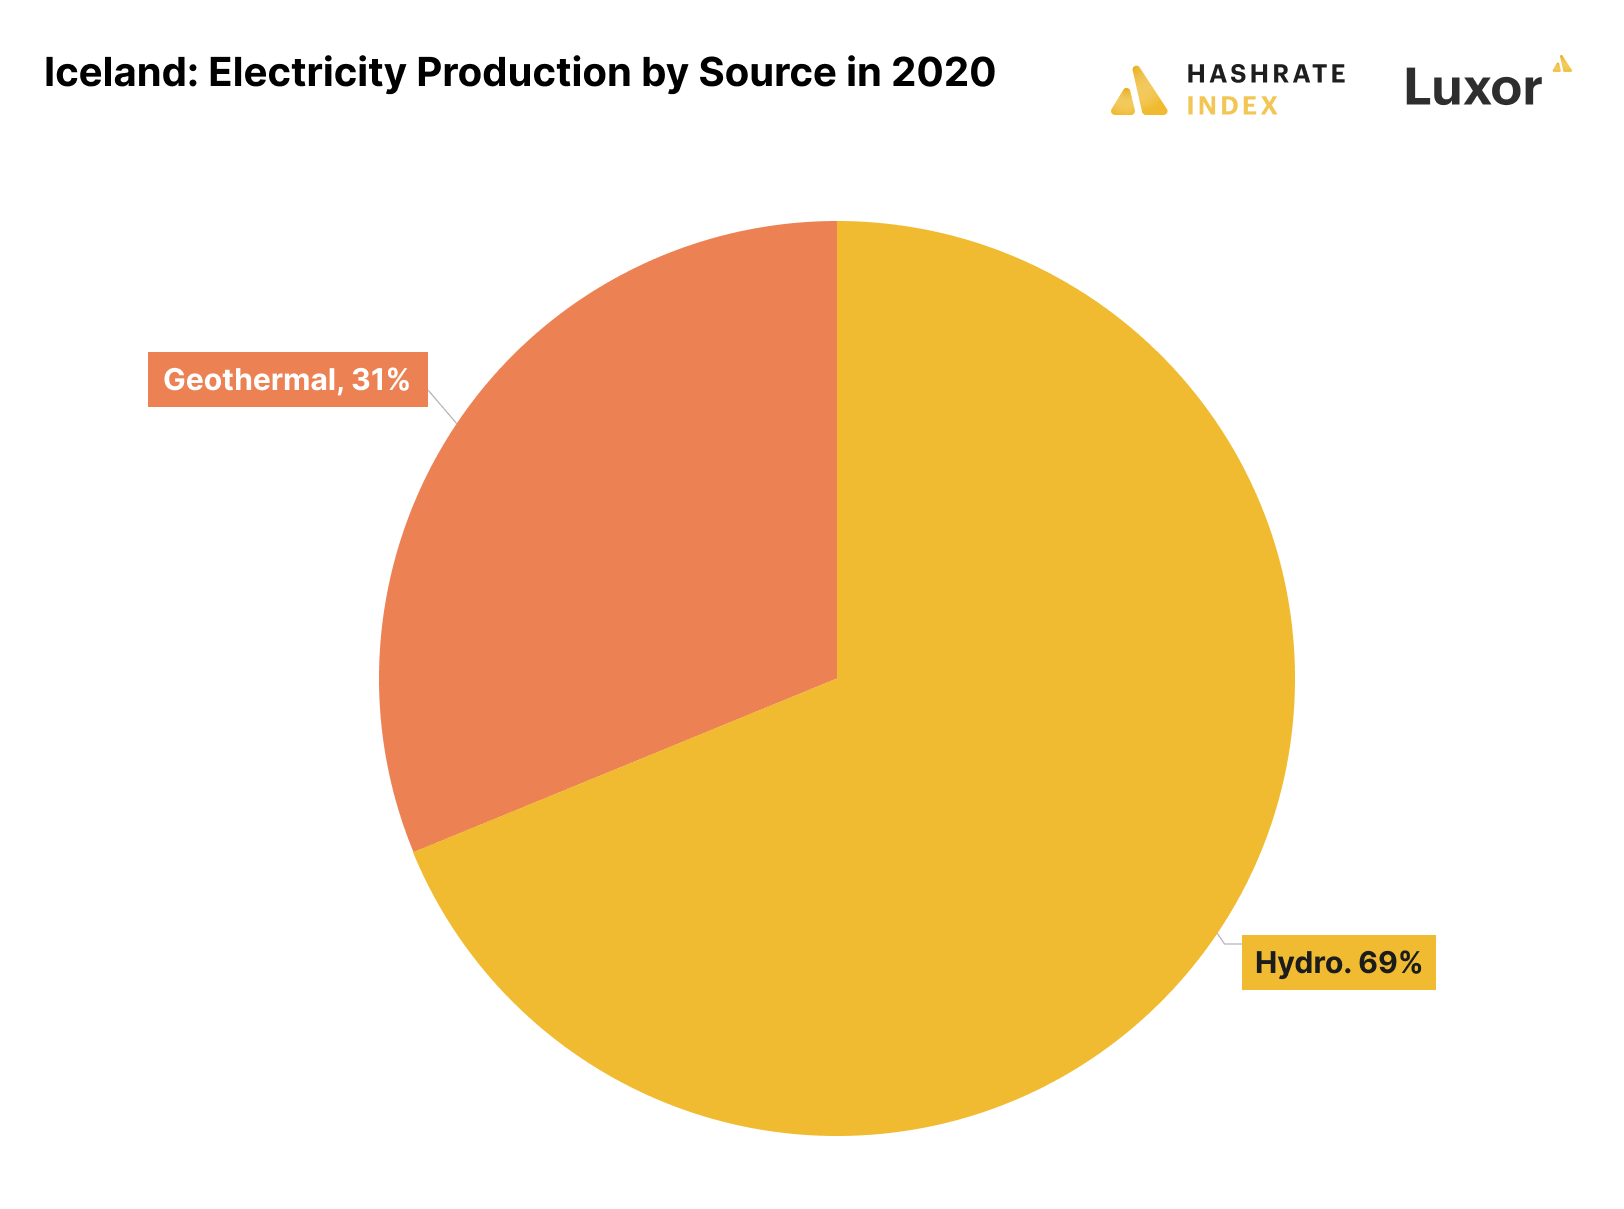 Iceland: electricity generation by source in 2020